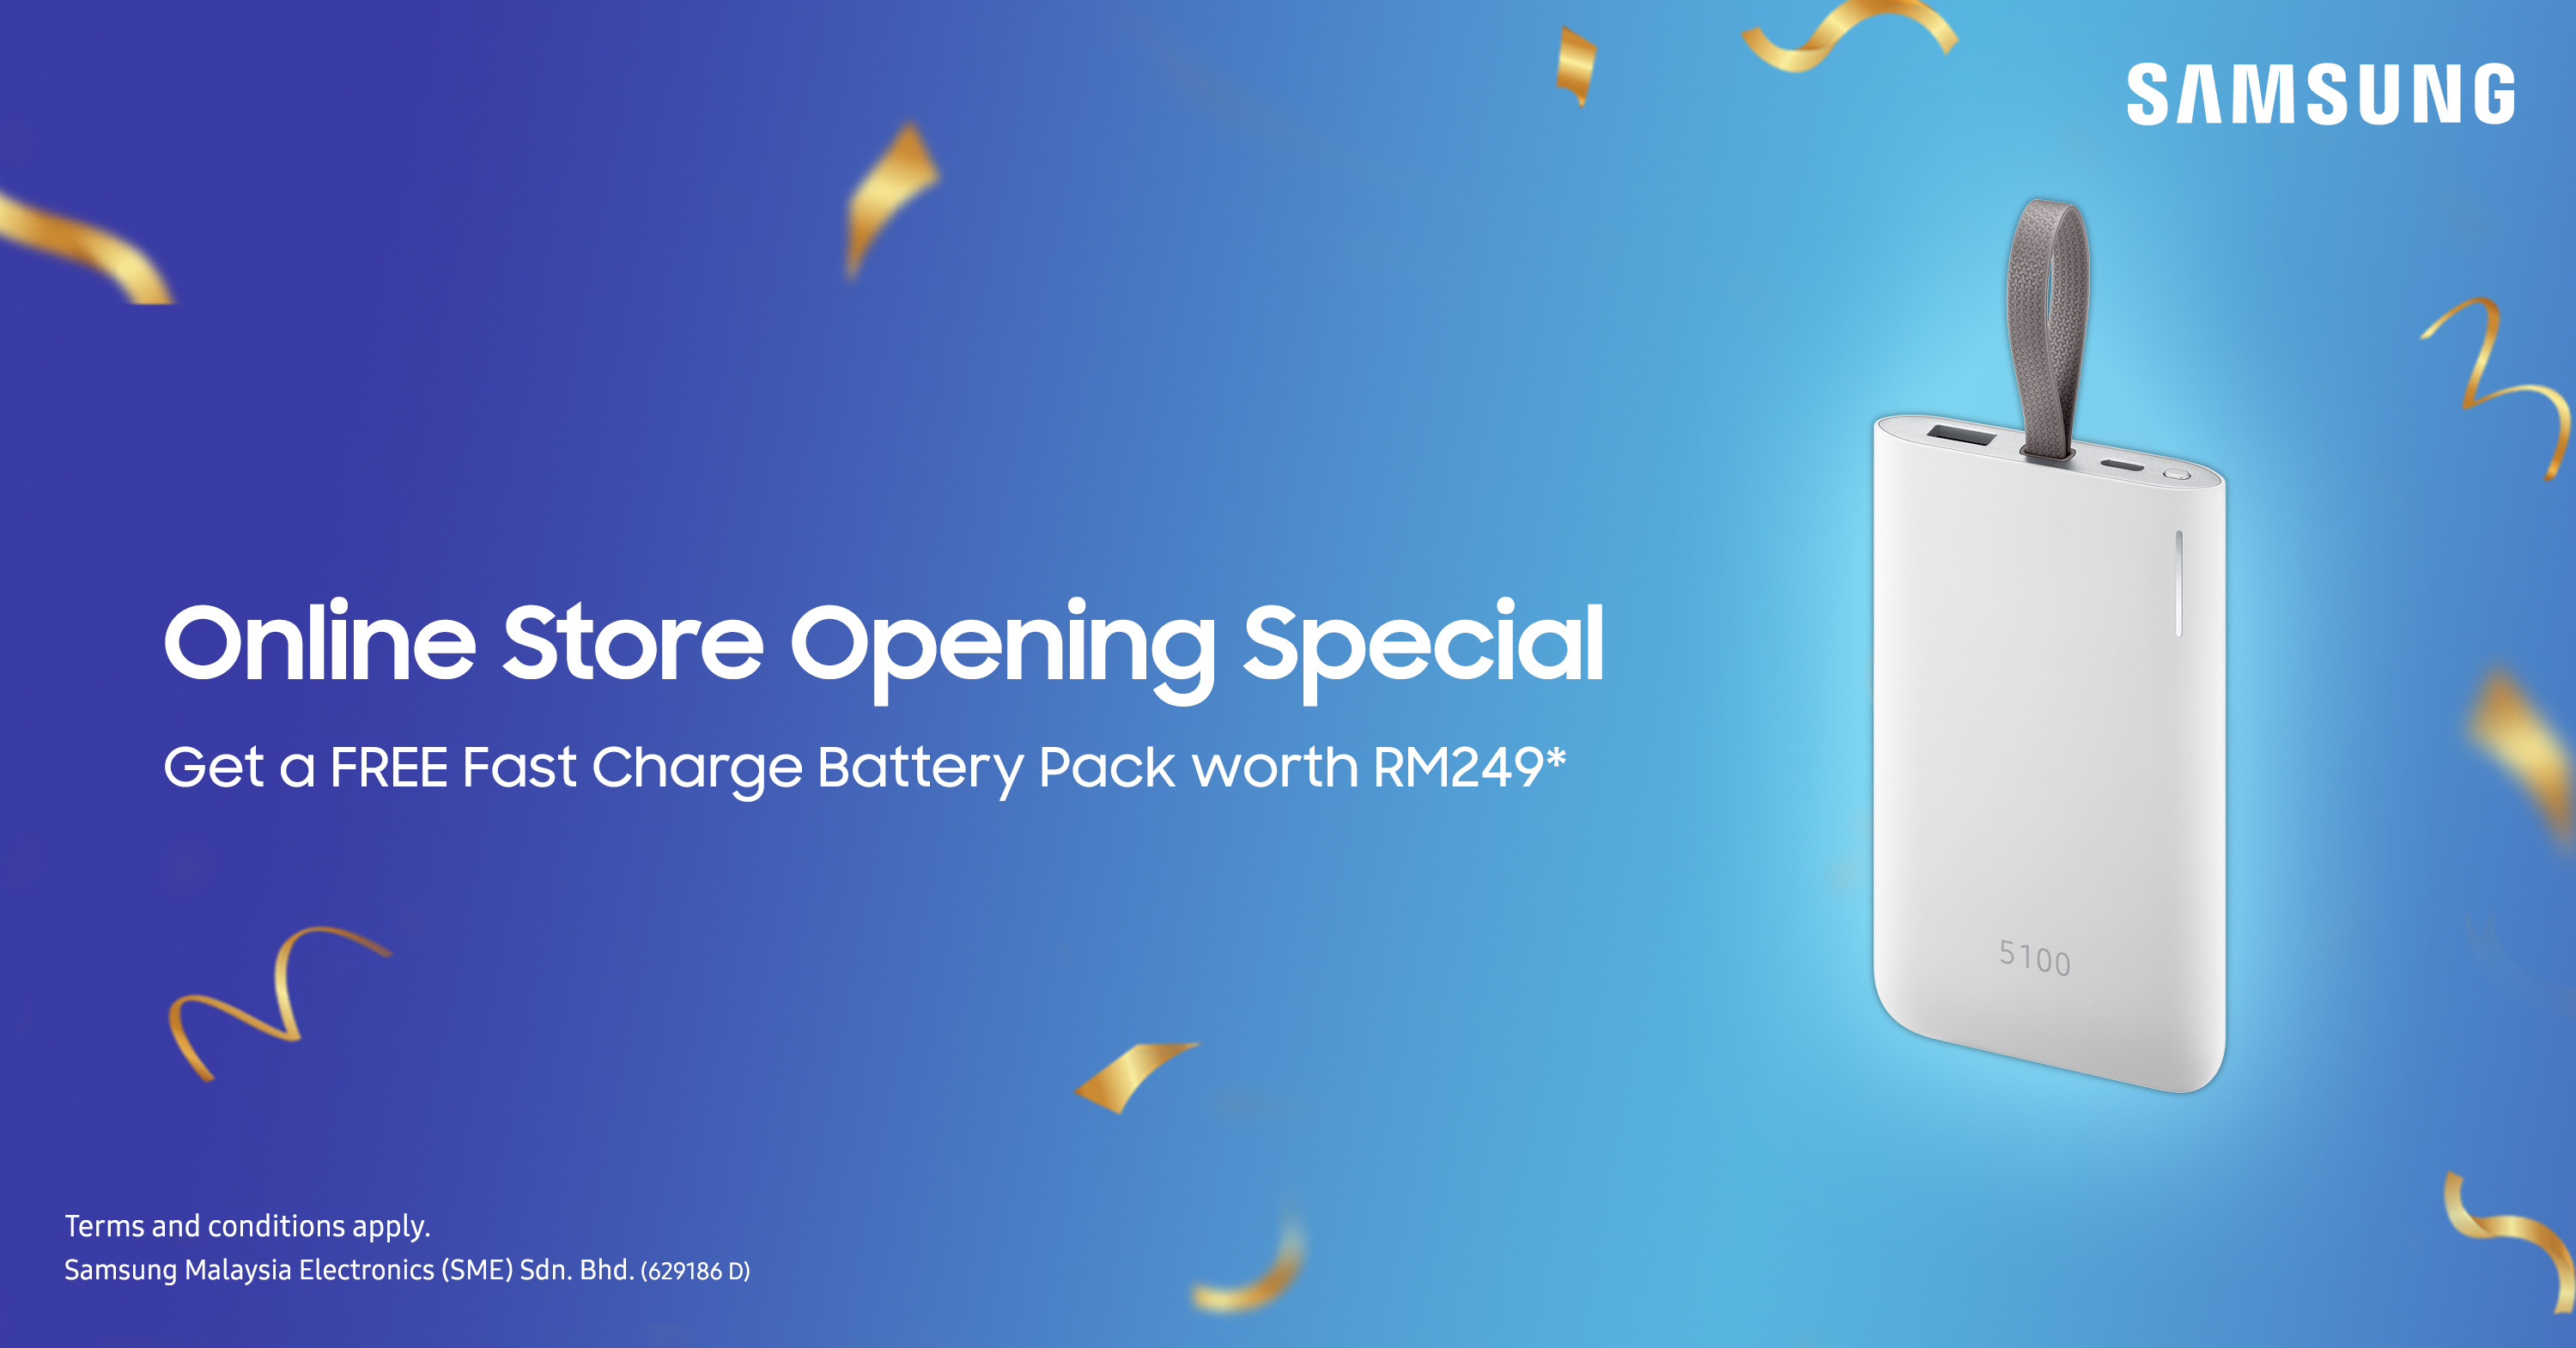 Purchase a Samsung device at their new online store and get a free 5100mAh power bank